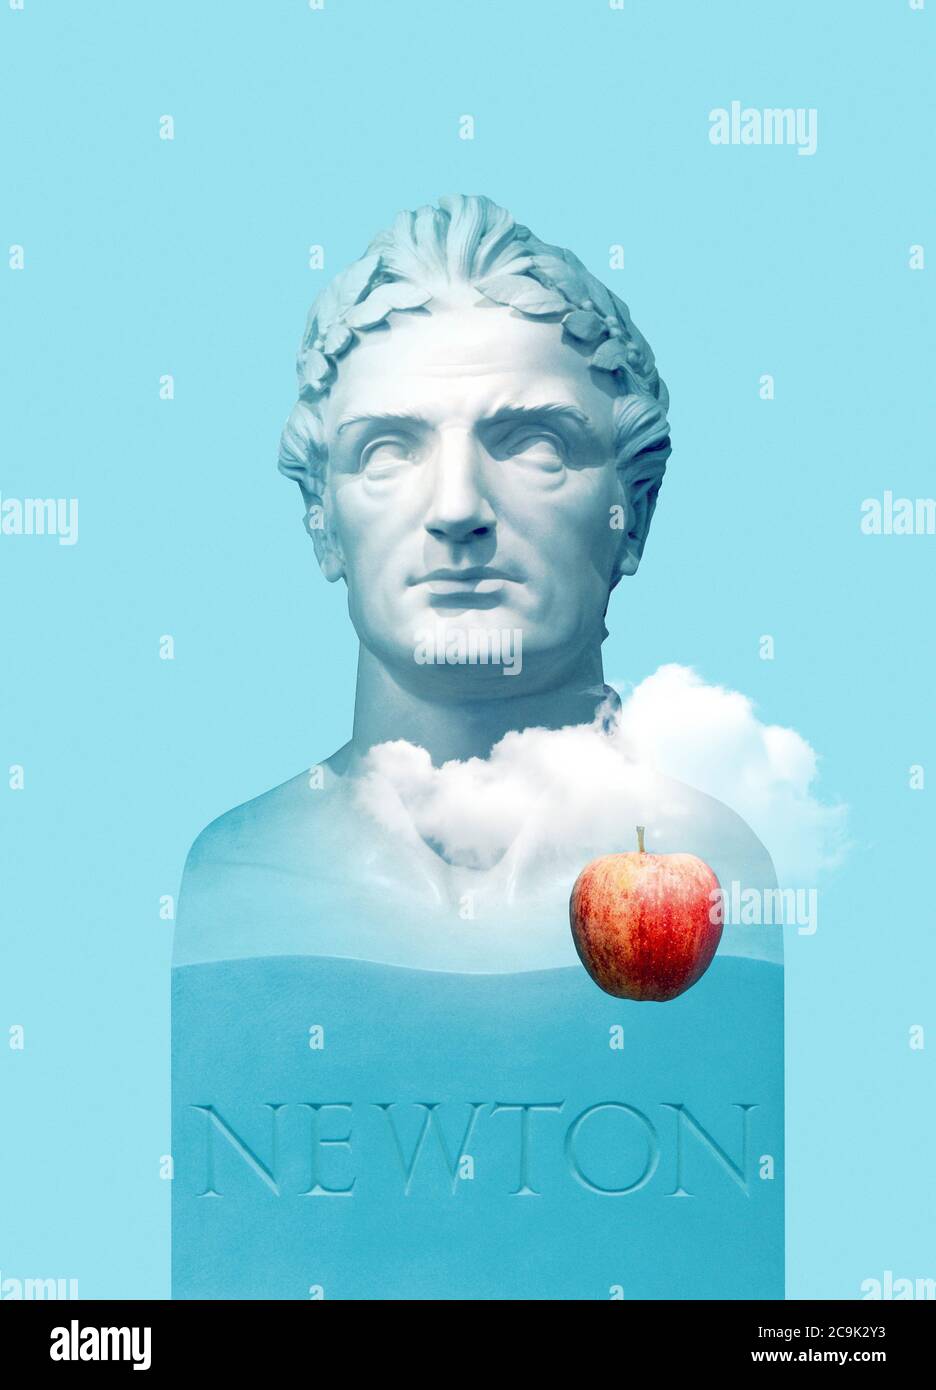 Isaac Newton and the apple, computer artwork. Stock Photo